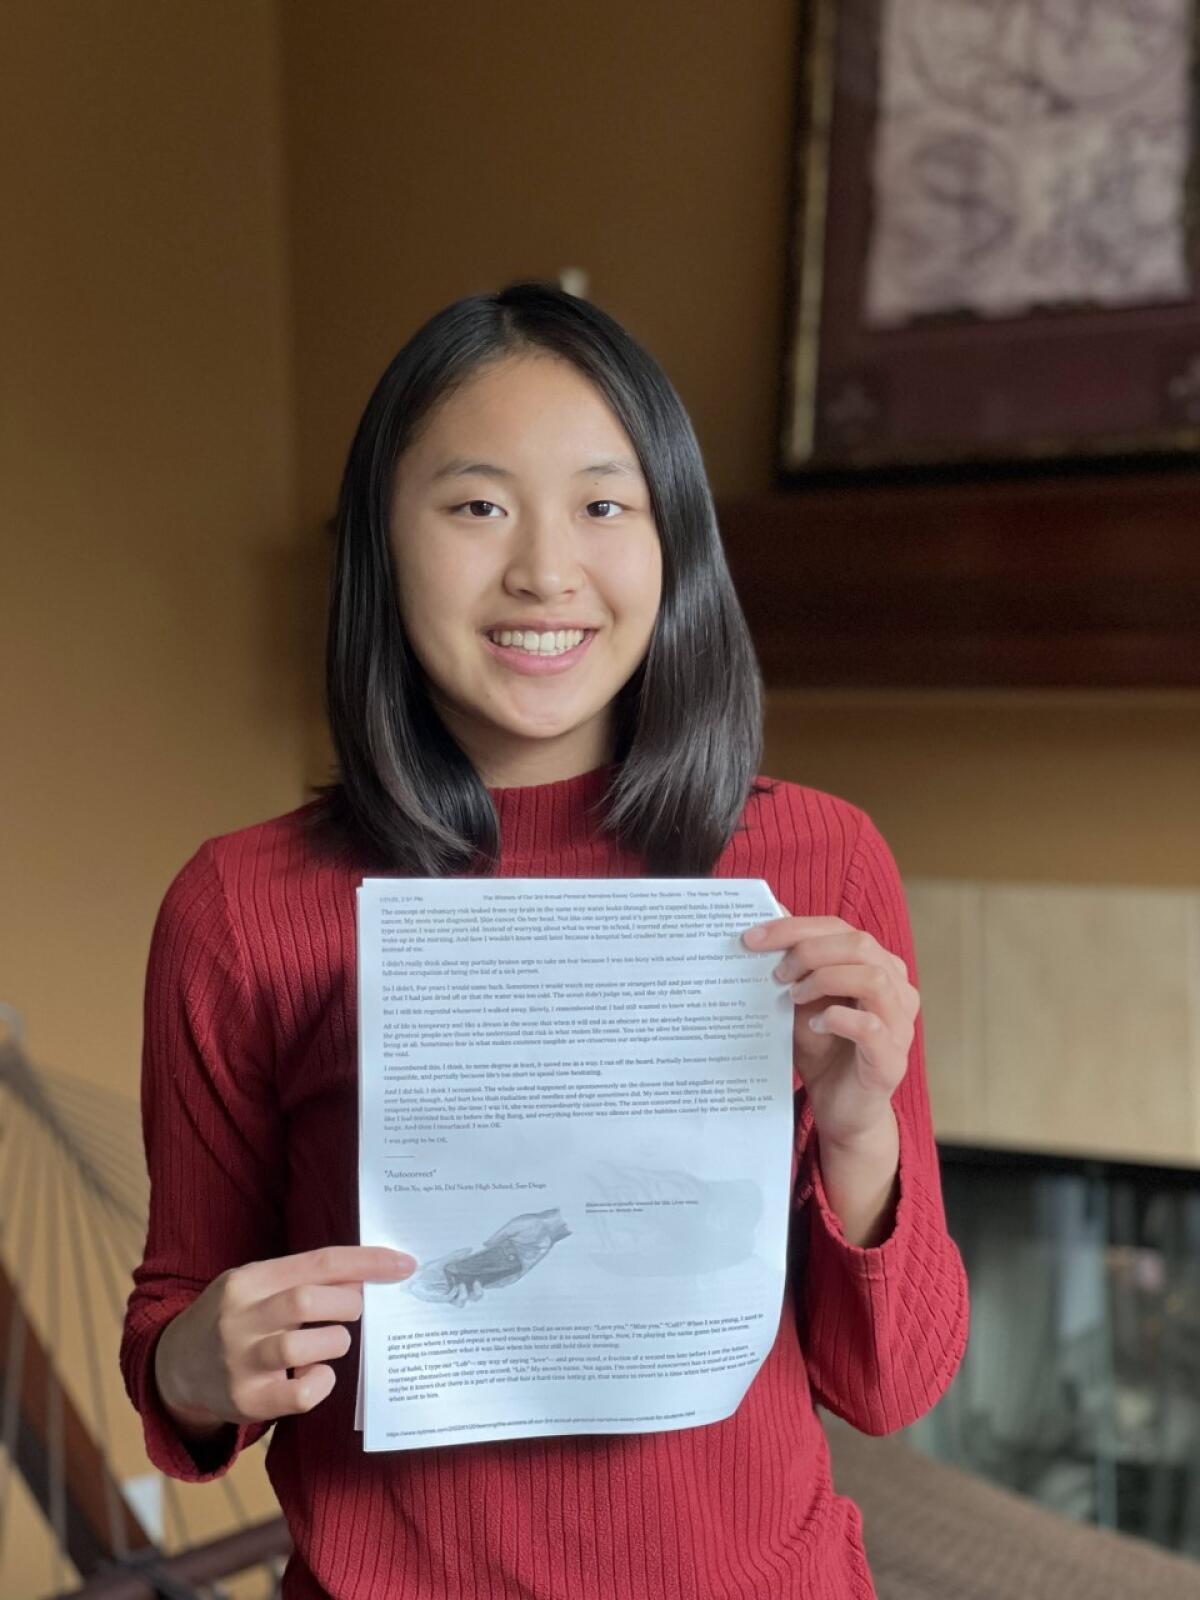 Ellen Xu, 16, holds a copy of her essay, which appeared in the New York Times.